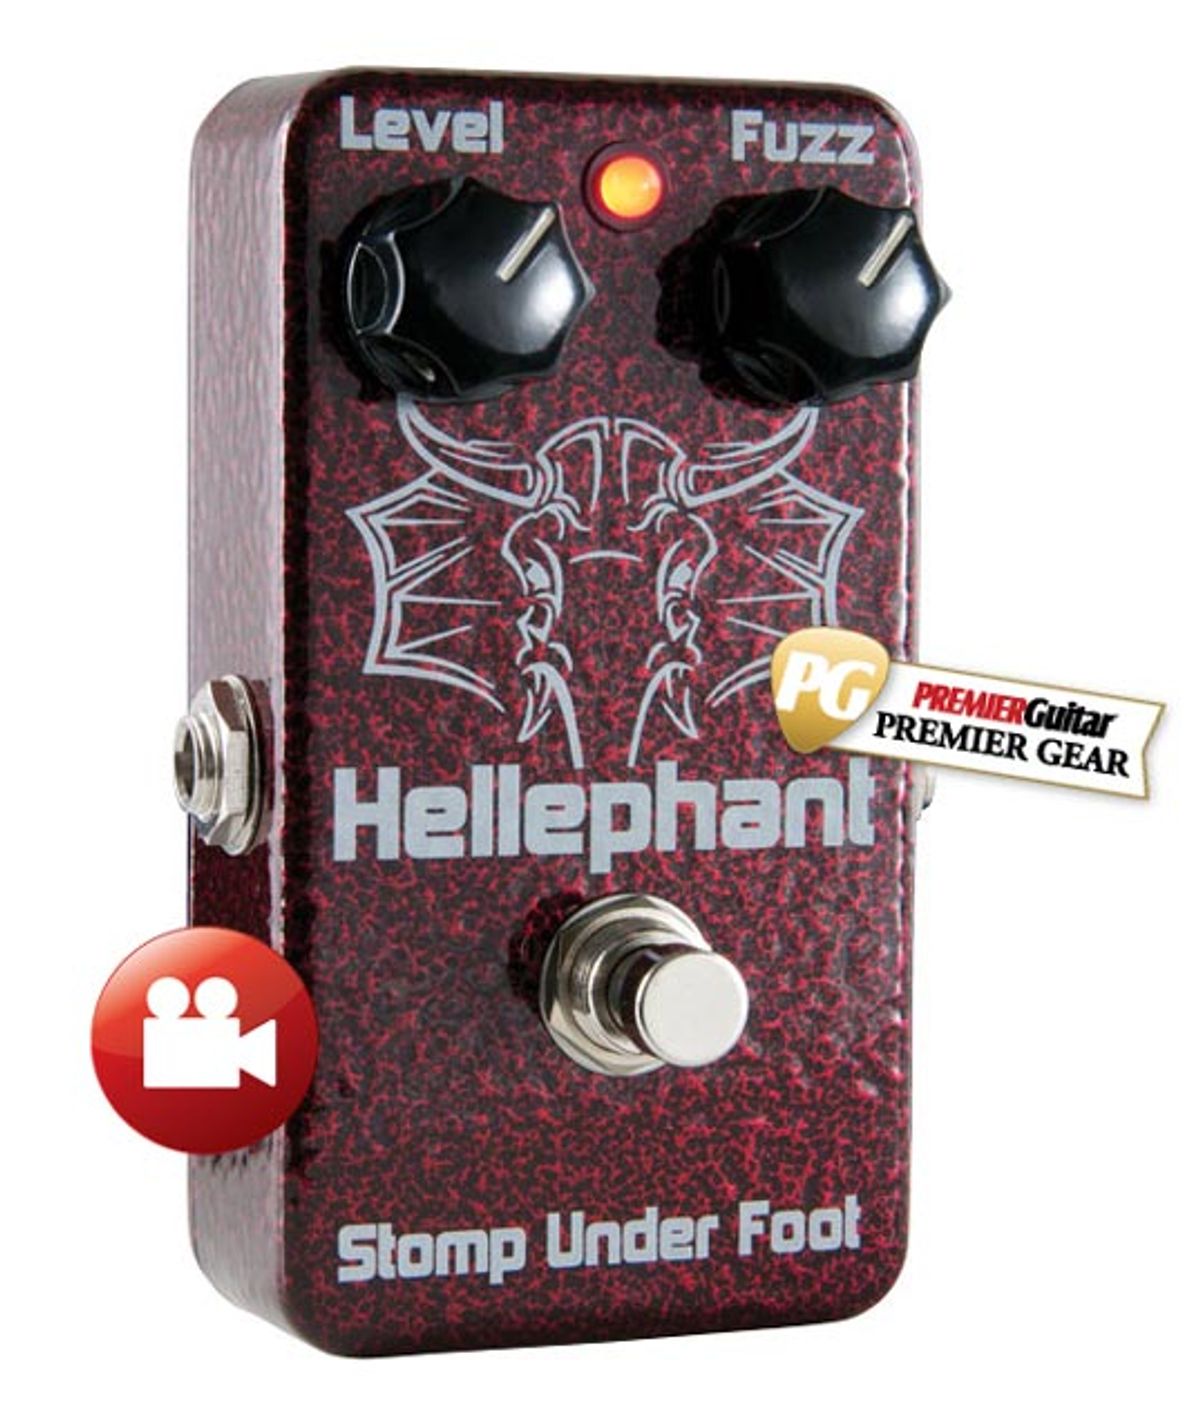 Stomp Under Foot Hellephant Review